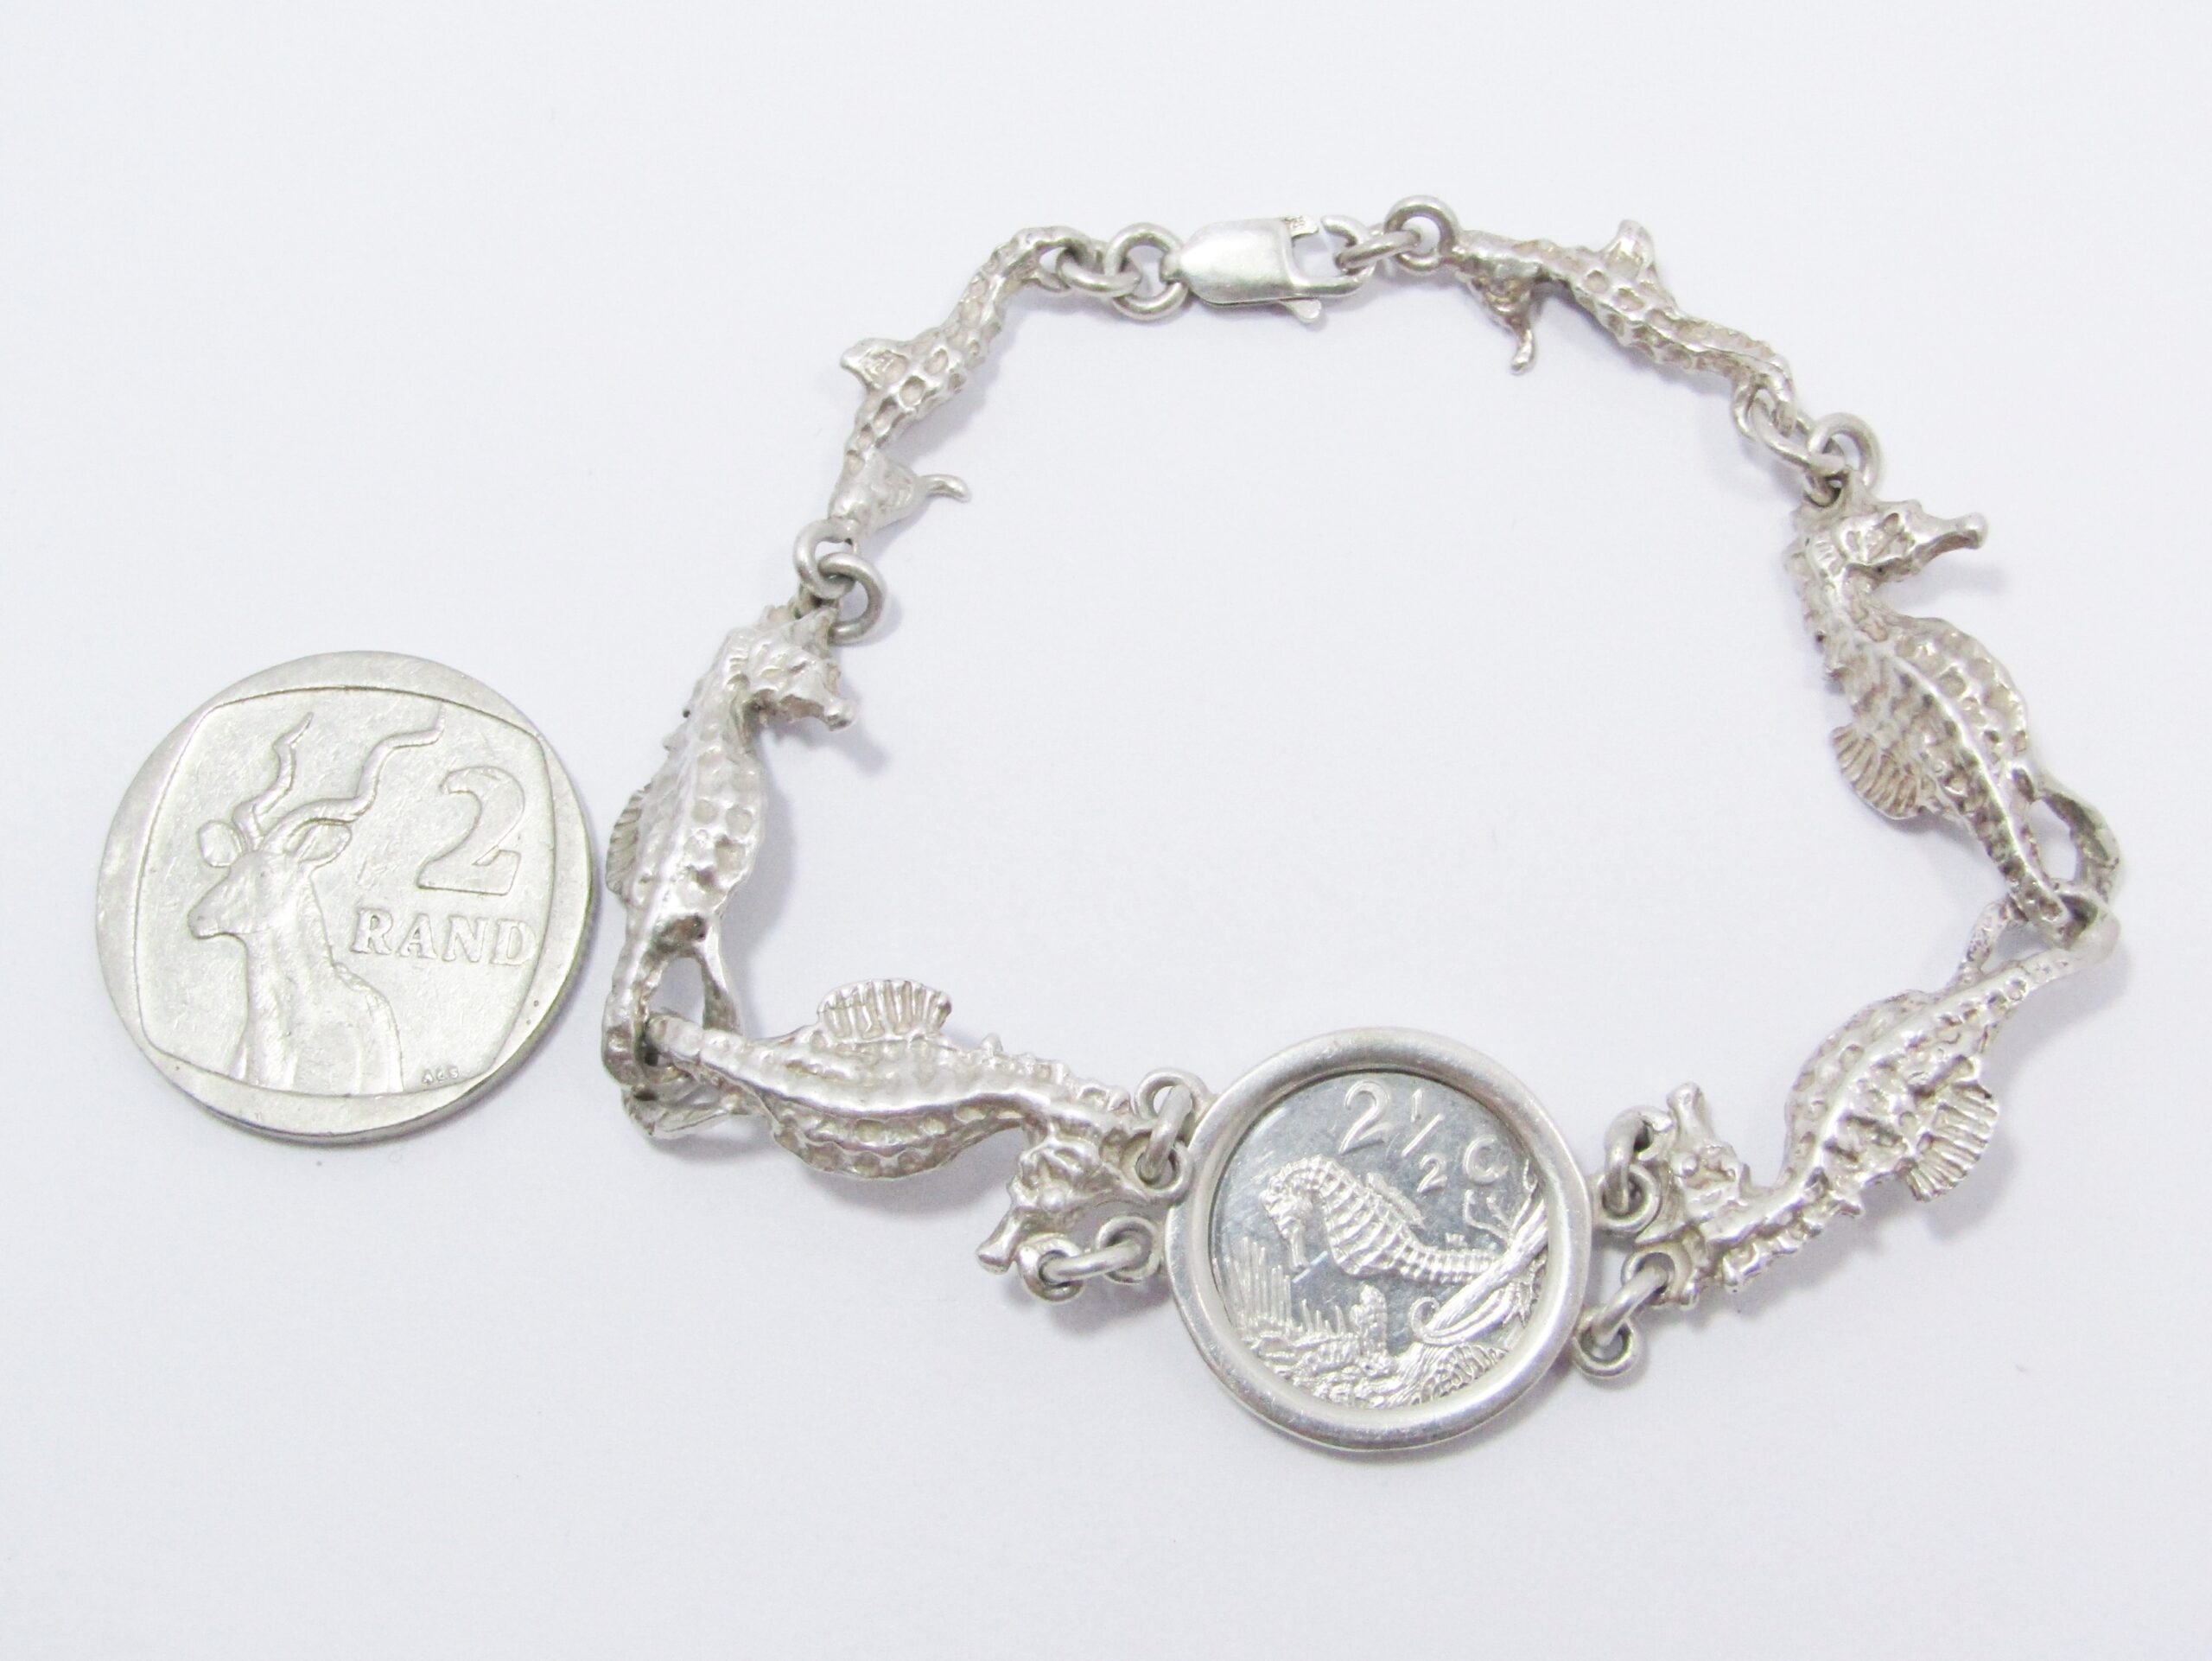 A Gorgeous Sea Horse Bracelet With a 1991 2 and a Half Cent Commemorative coin in Sterling Silver.